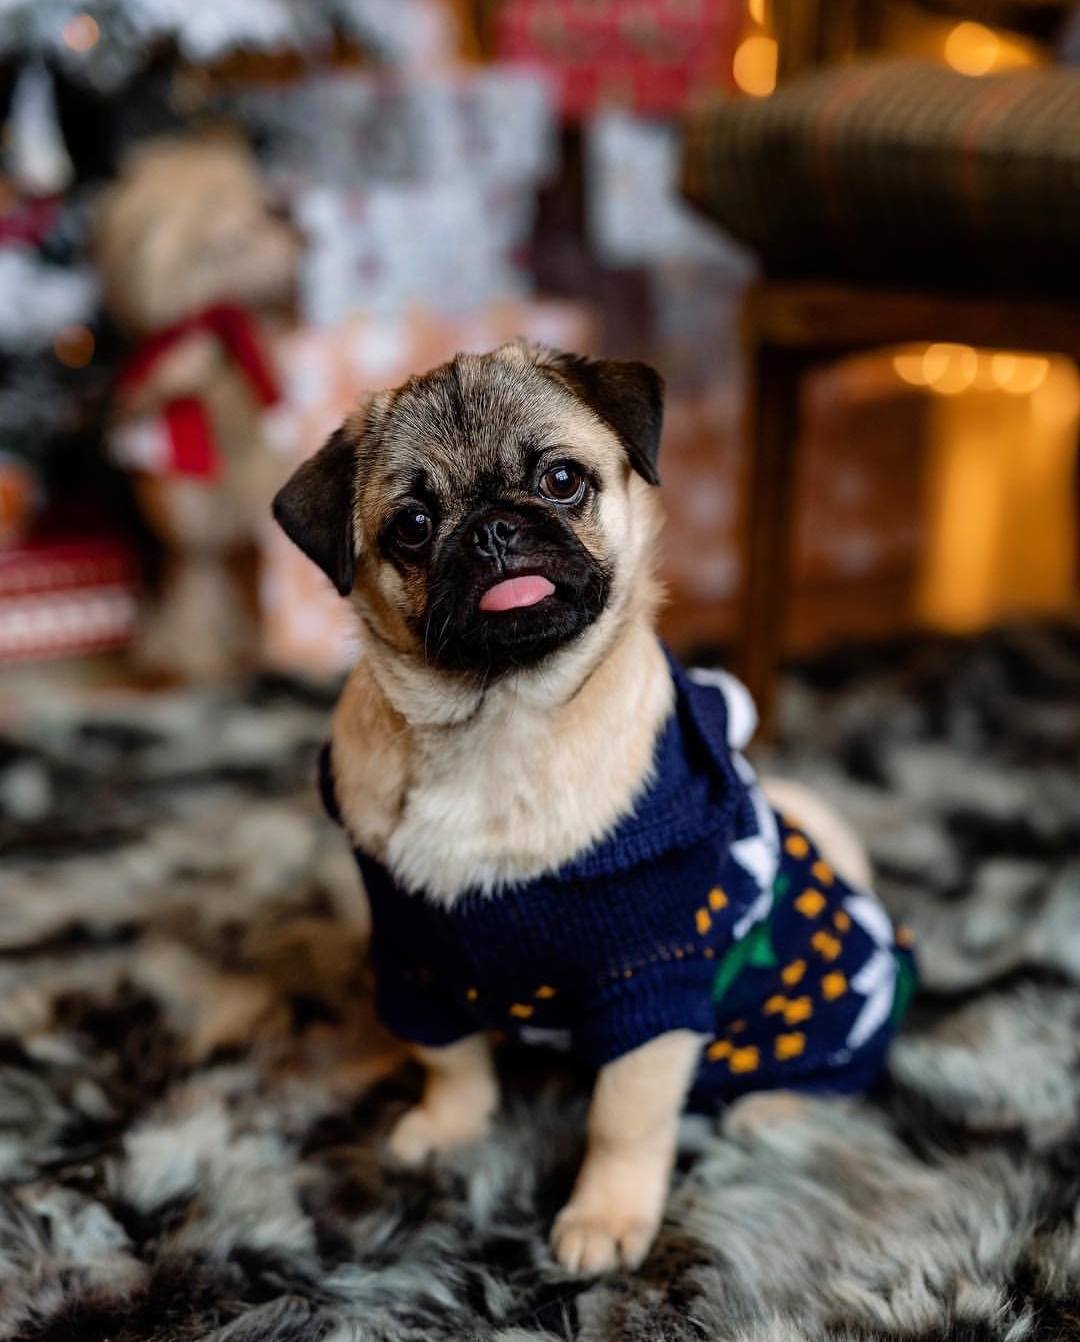 Pug wearing a sweater while sitting on the carpet with its tongues slightly out